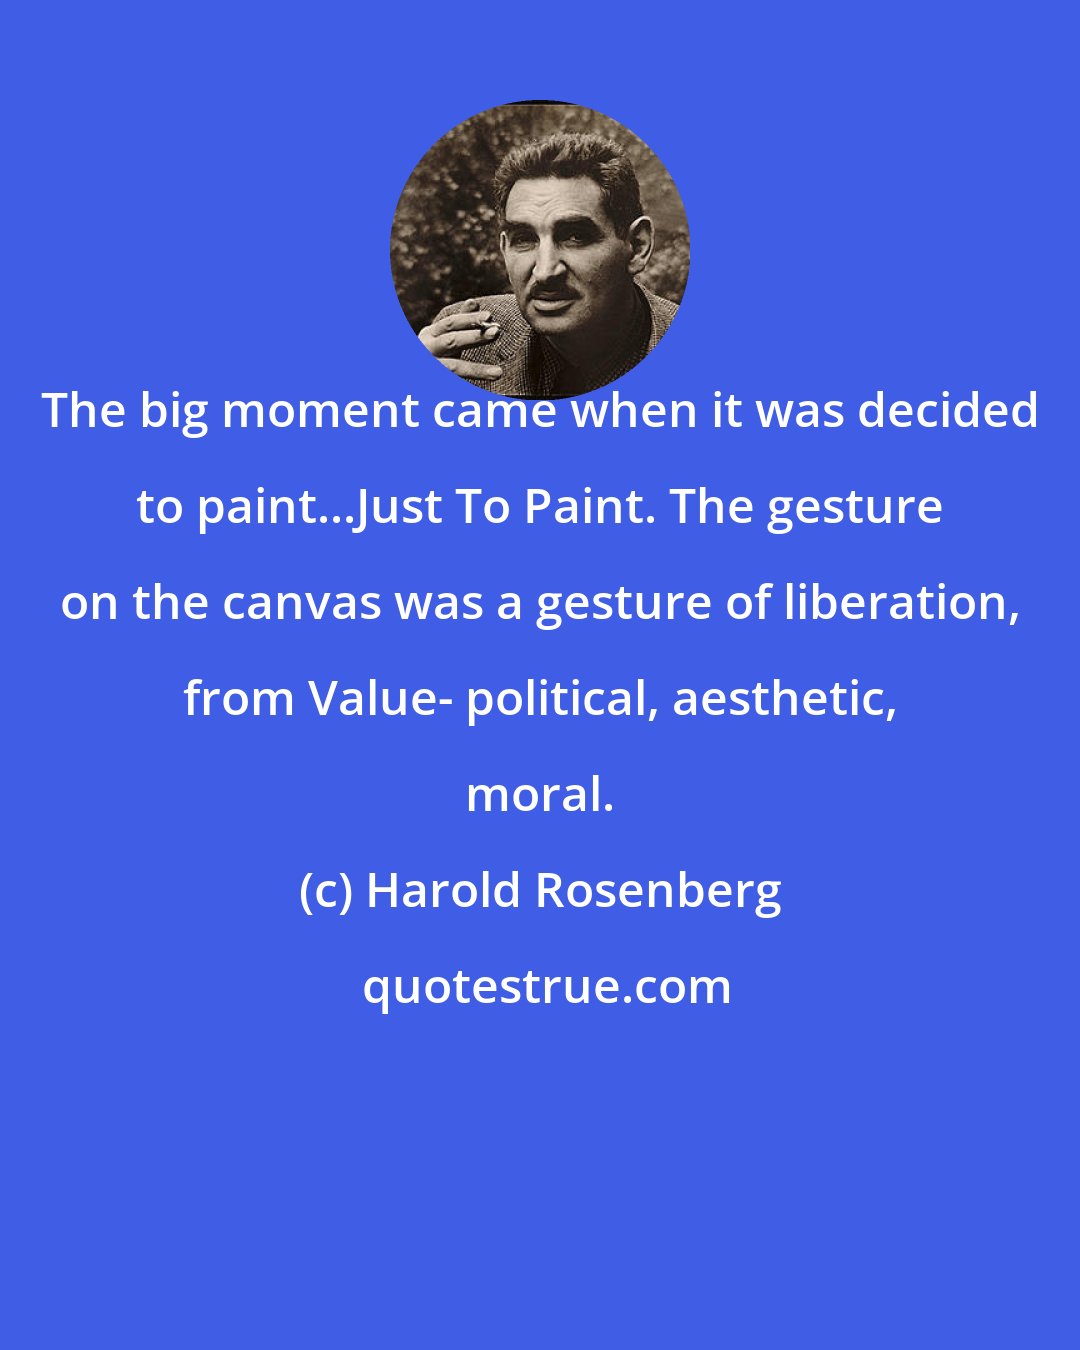 Harold Rosenberg: The big moment came when it was decided to paint...Just To Paint. The gesture on the canvas was a gesture of liberation, from Value- political, aesthetic, moral.